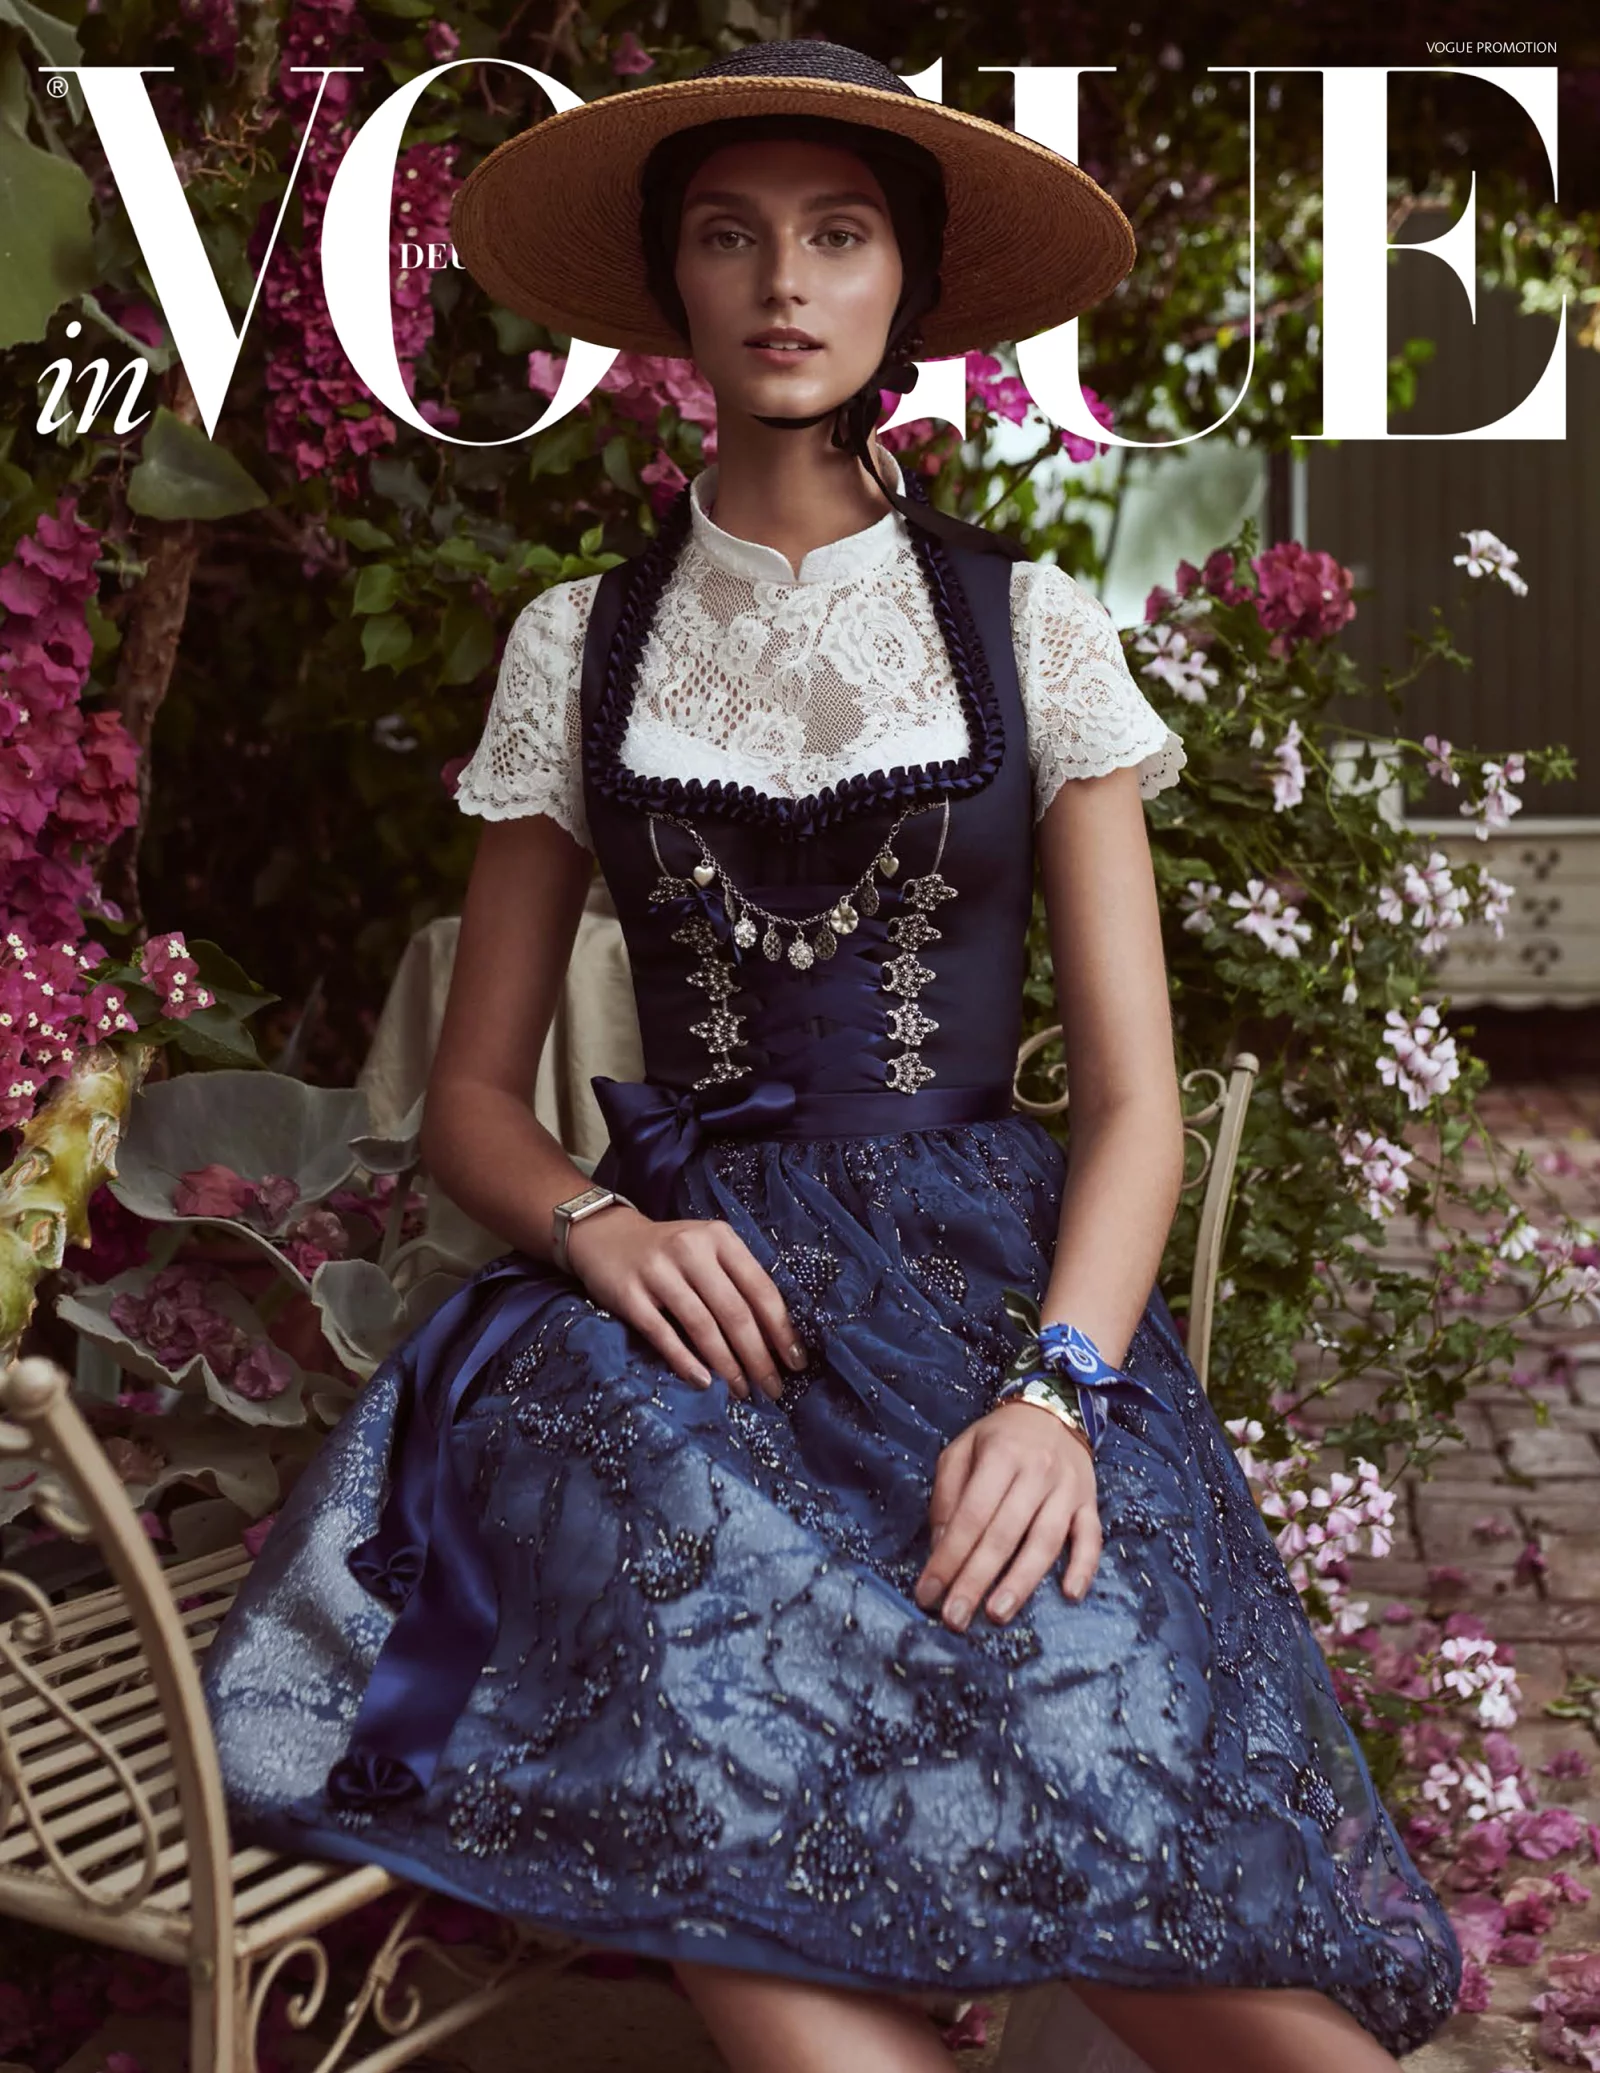 Lodenfrey for Vogue Germany 8 by Andreas ORTNER